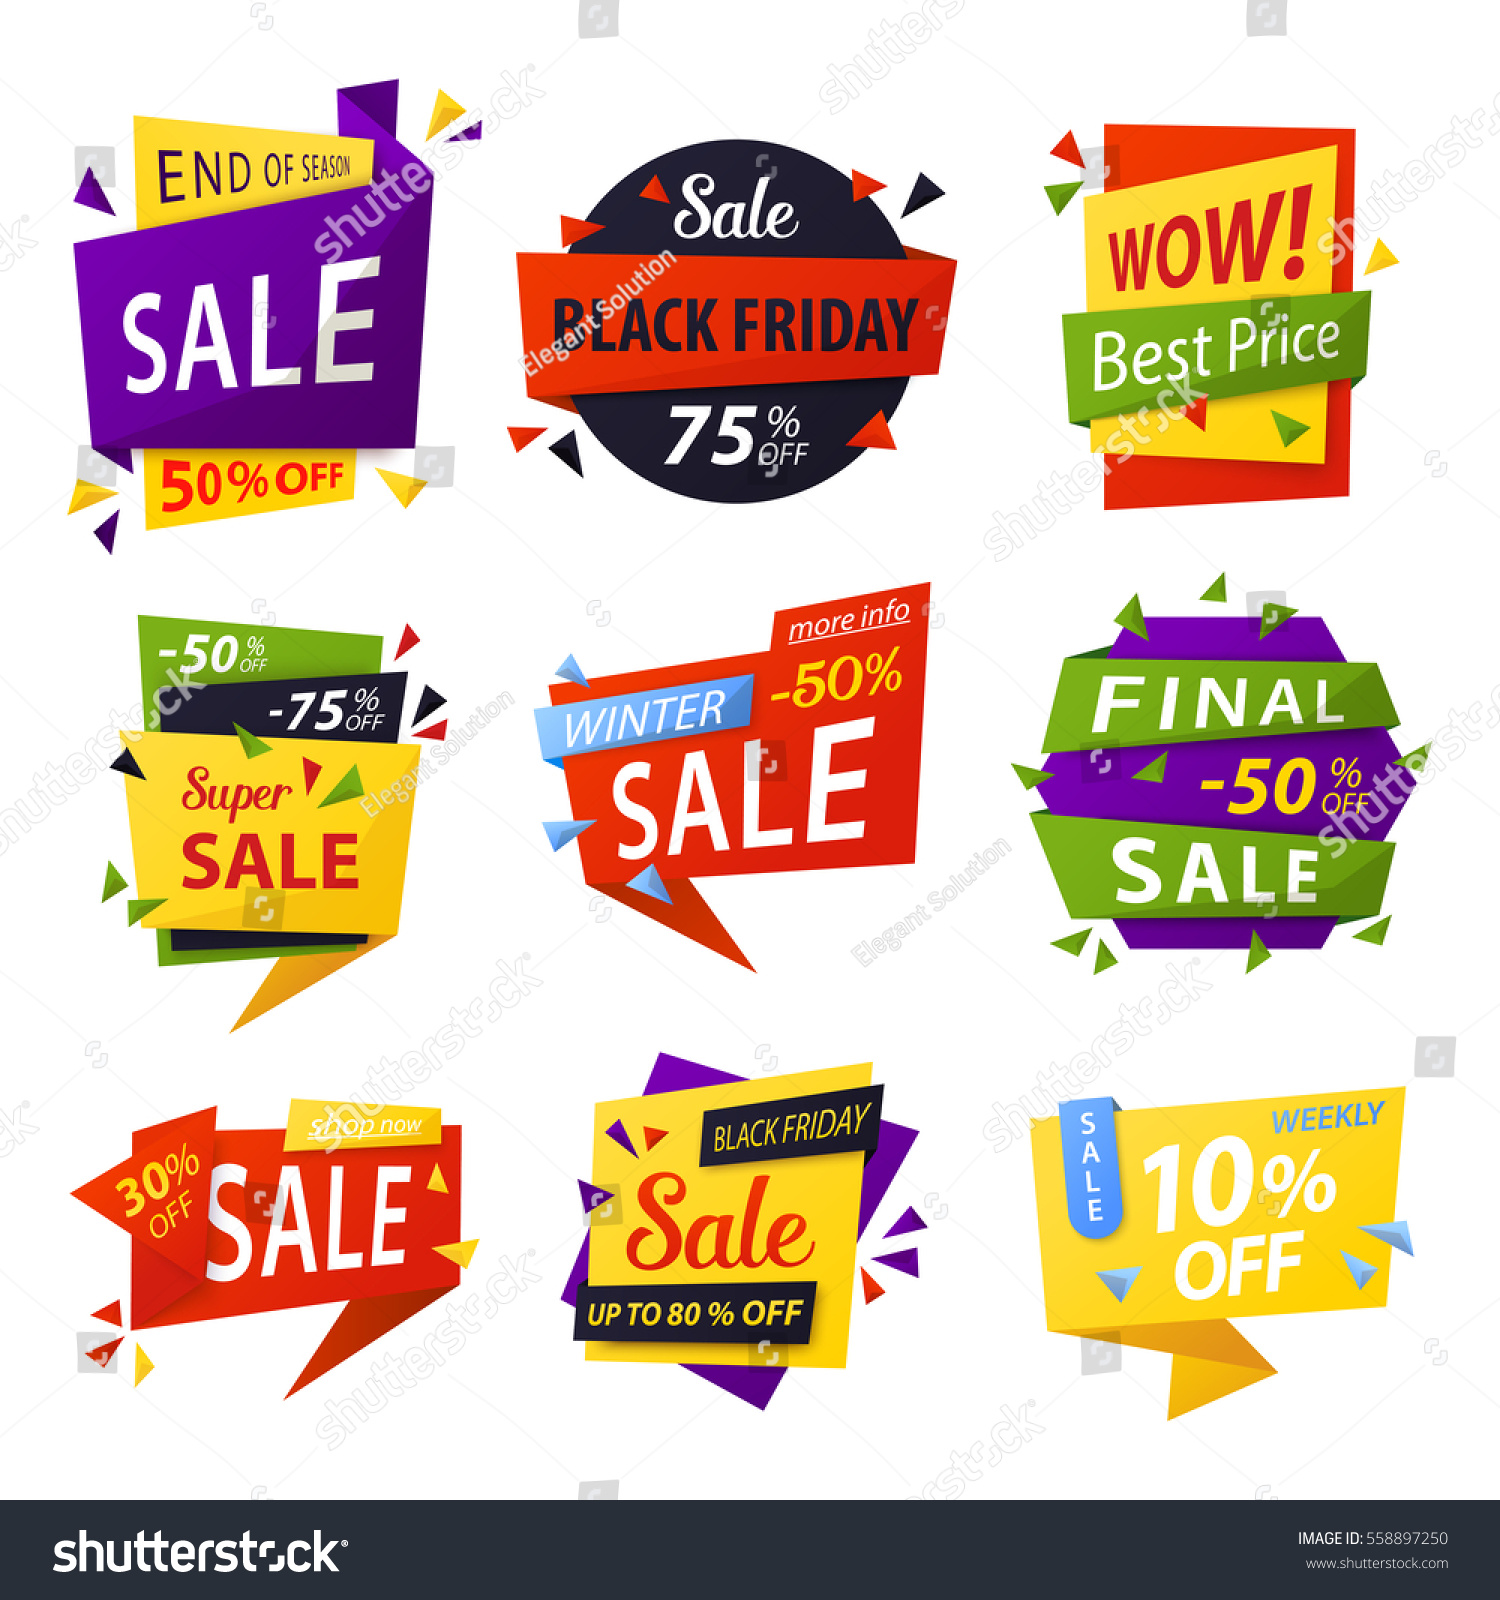 100+2inch Round Stickers Modern Promotional Retail Labels Sales Discount Promote 